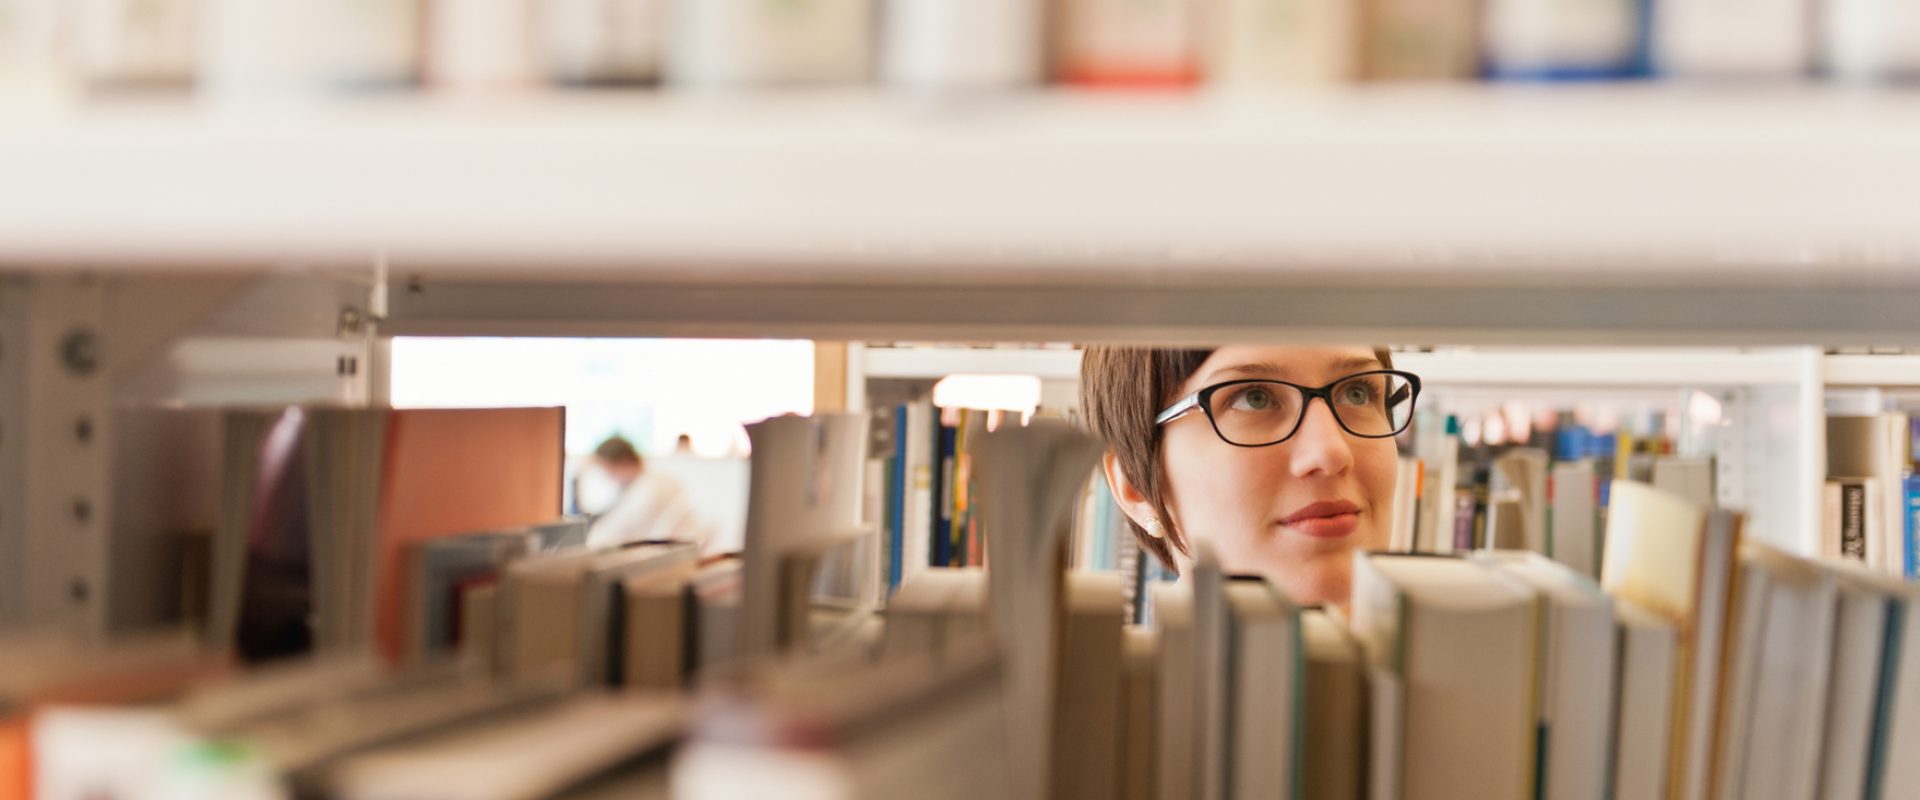 a glimpse of a woman through the library stacks